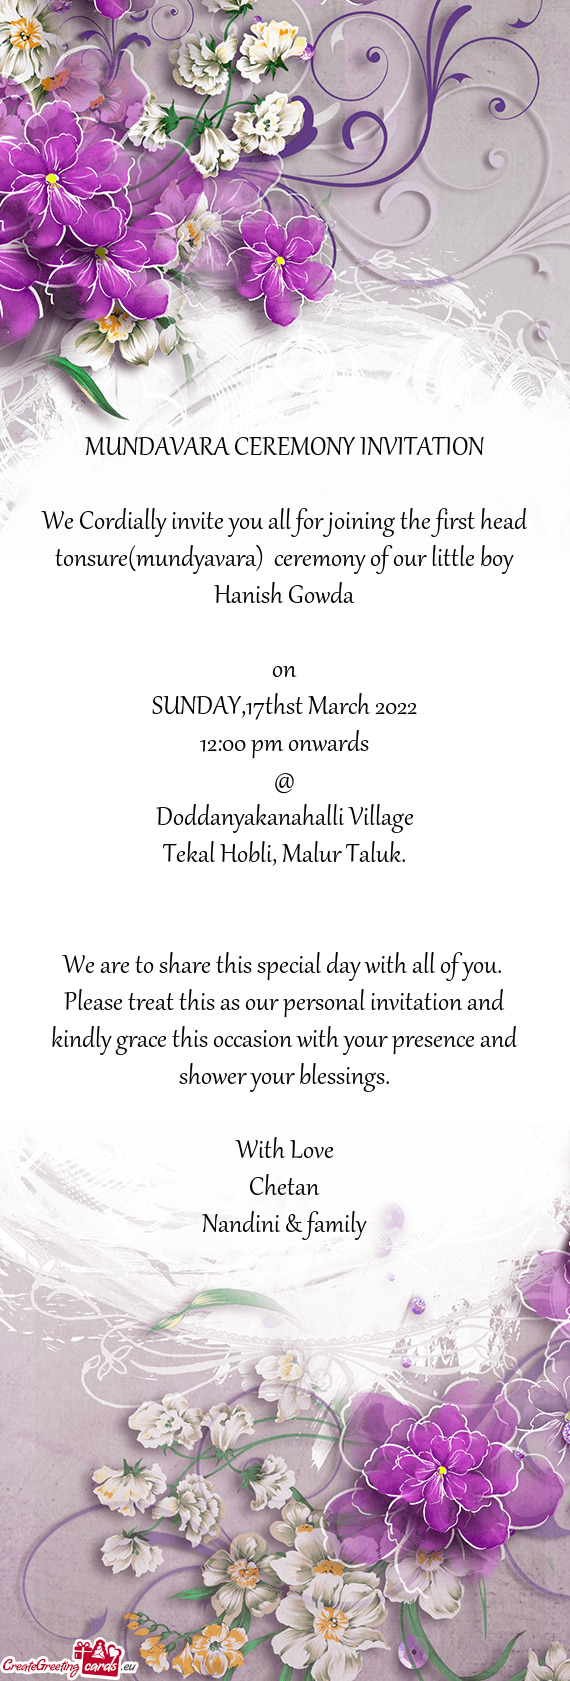 We Cordially invite you all for joining the first head tonsure(mundyavara) ceremony of our little b